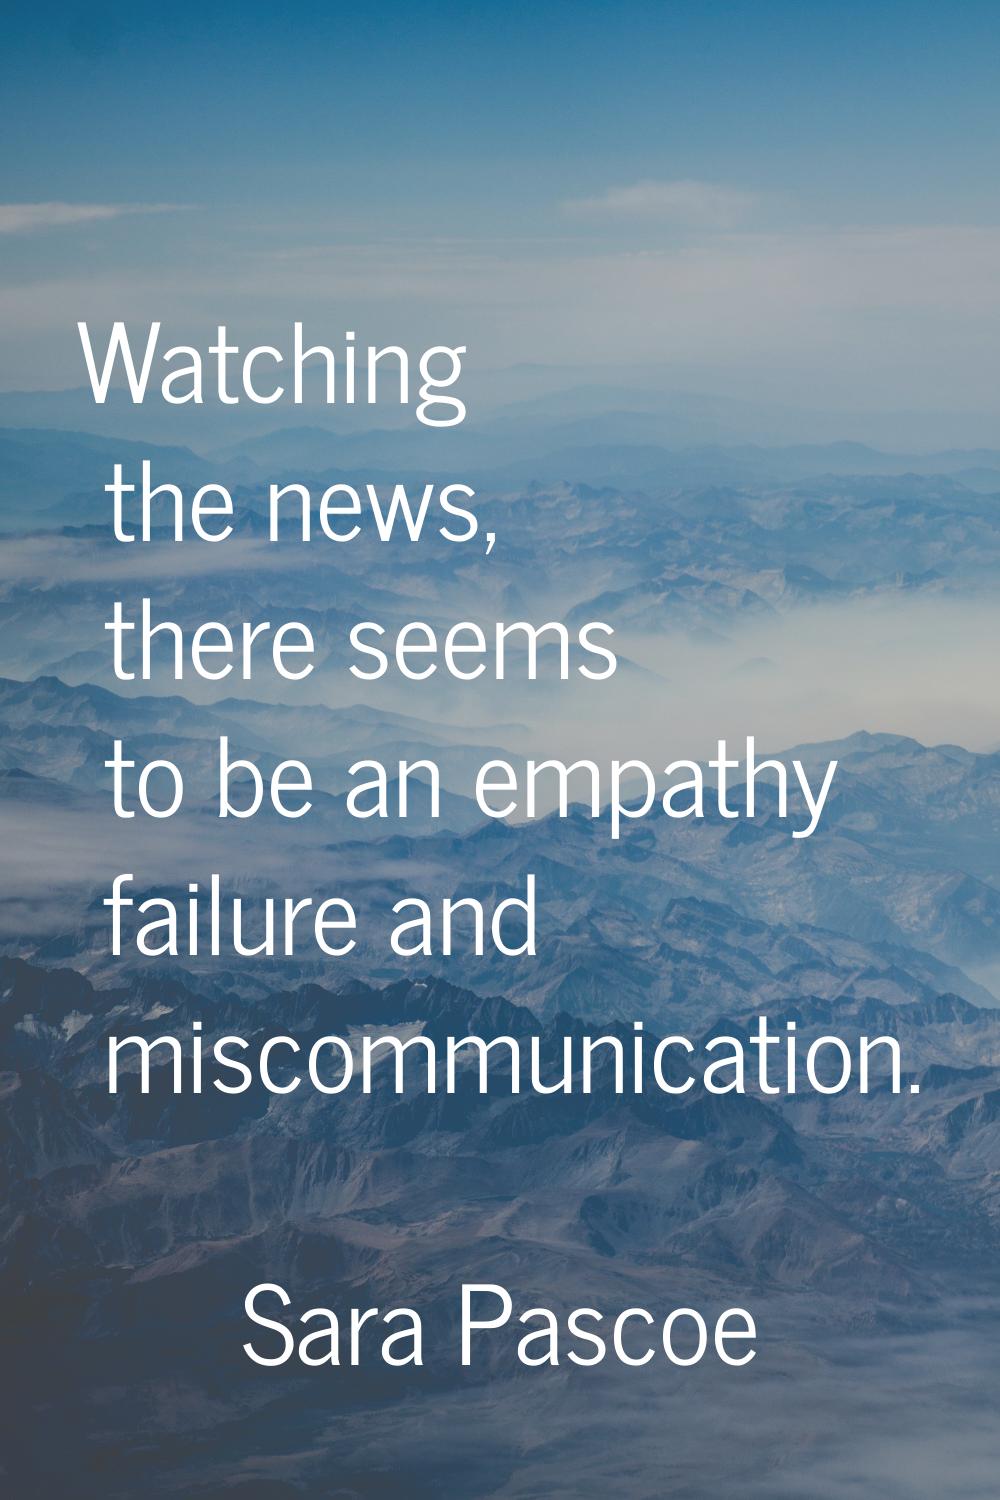 Watching the news, there seems to be an empathy failure and miscommunication.